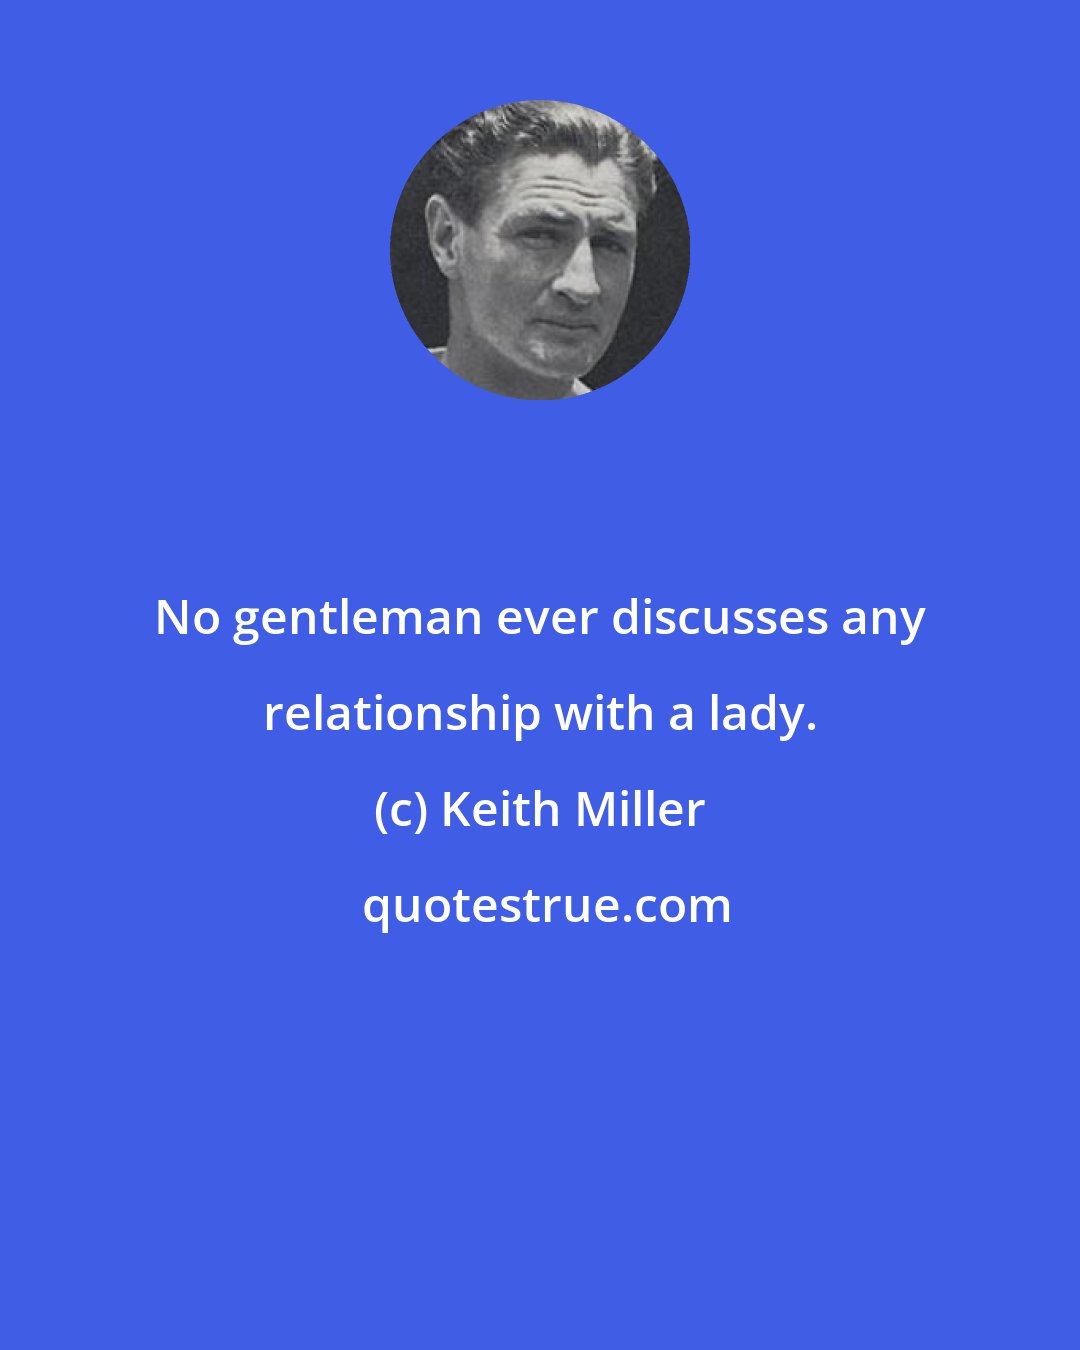 Keith Miller: No gentleman ever discusses any relationship with a lady.